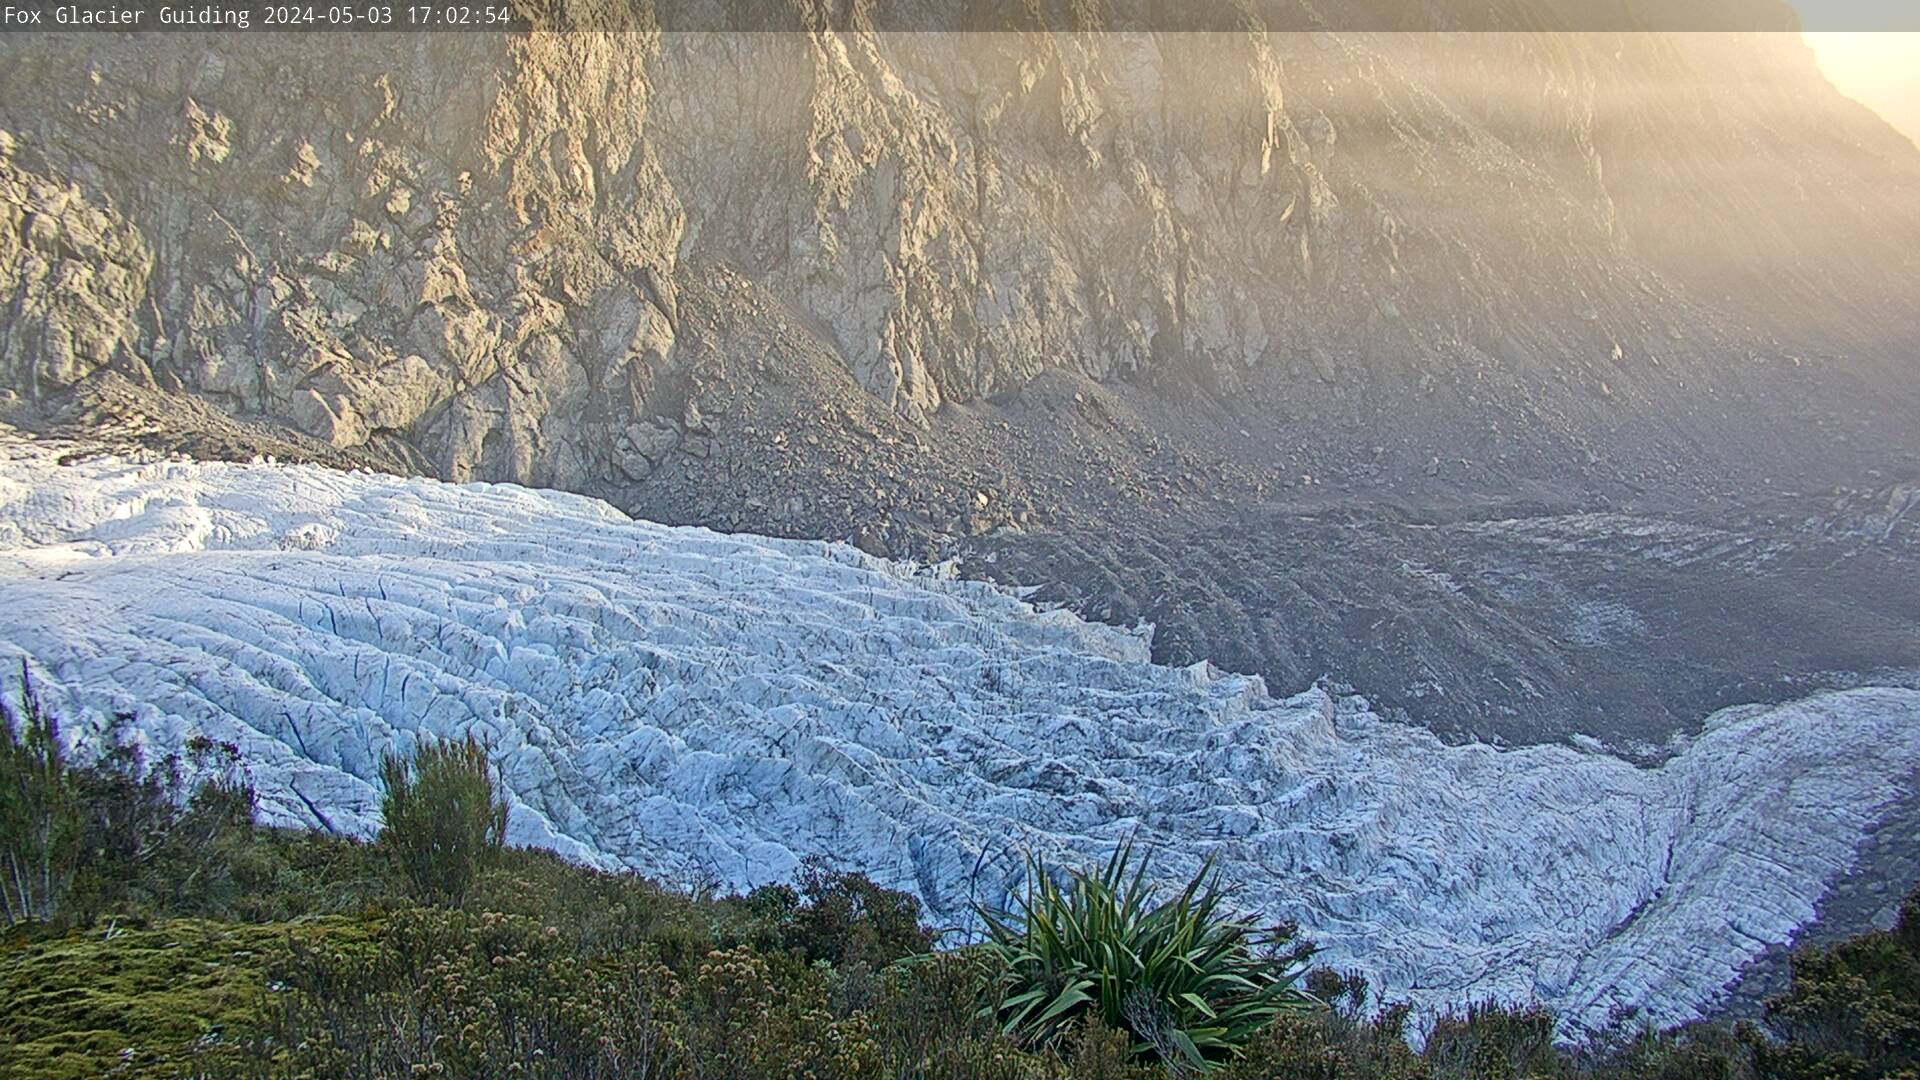 Latest image from Fox Glacier web cam - View 6